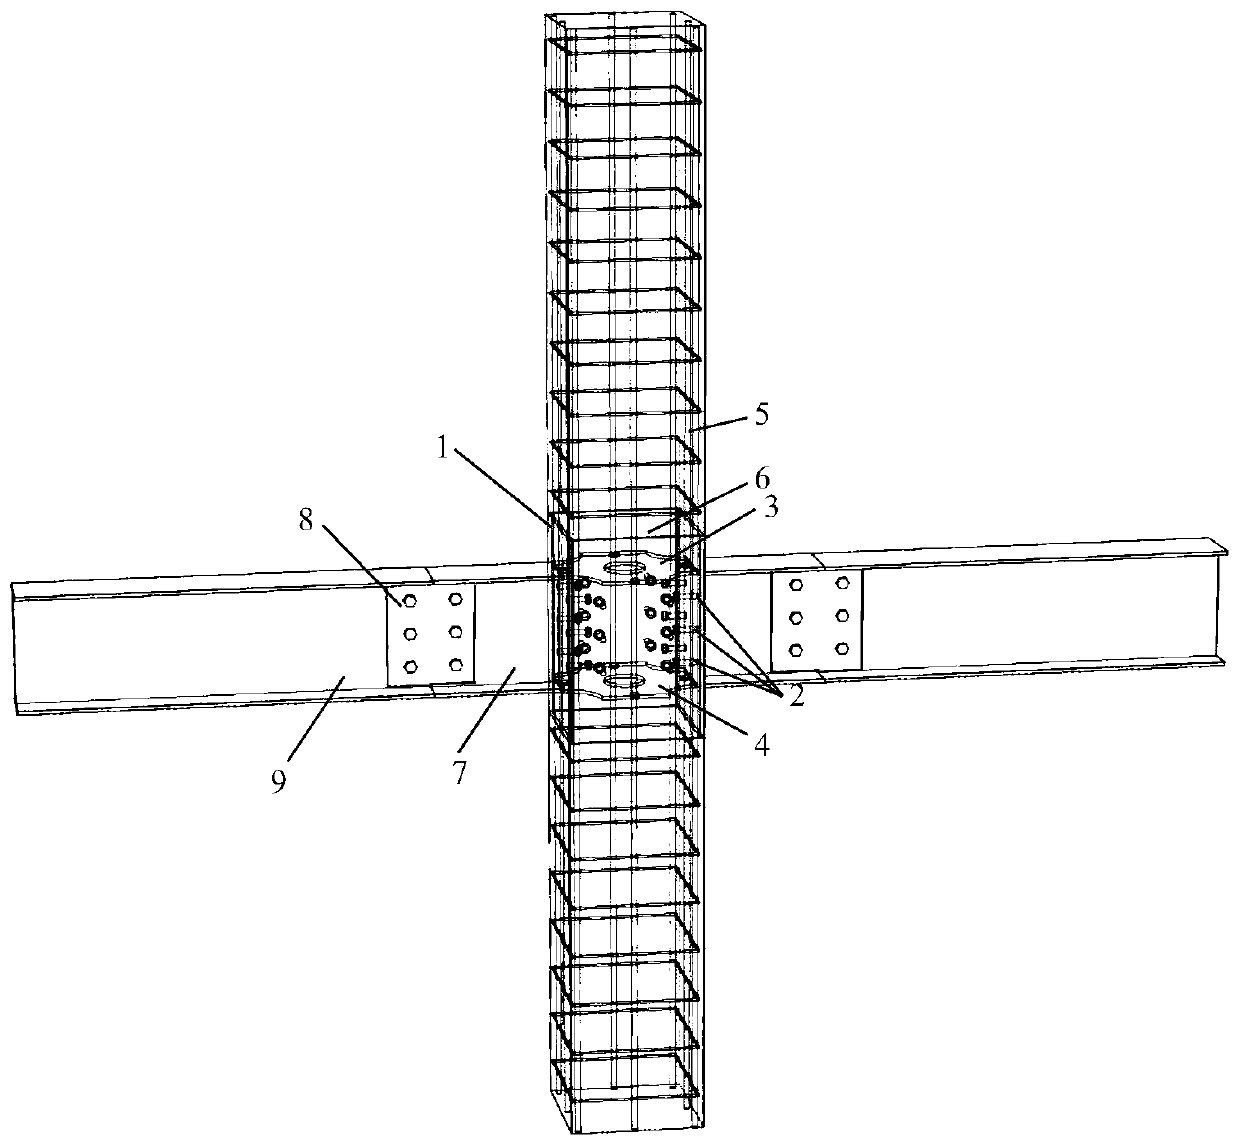 Precast concrete column and steel beam connecting joint with inner partition plates